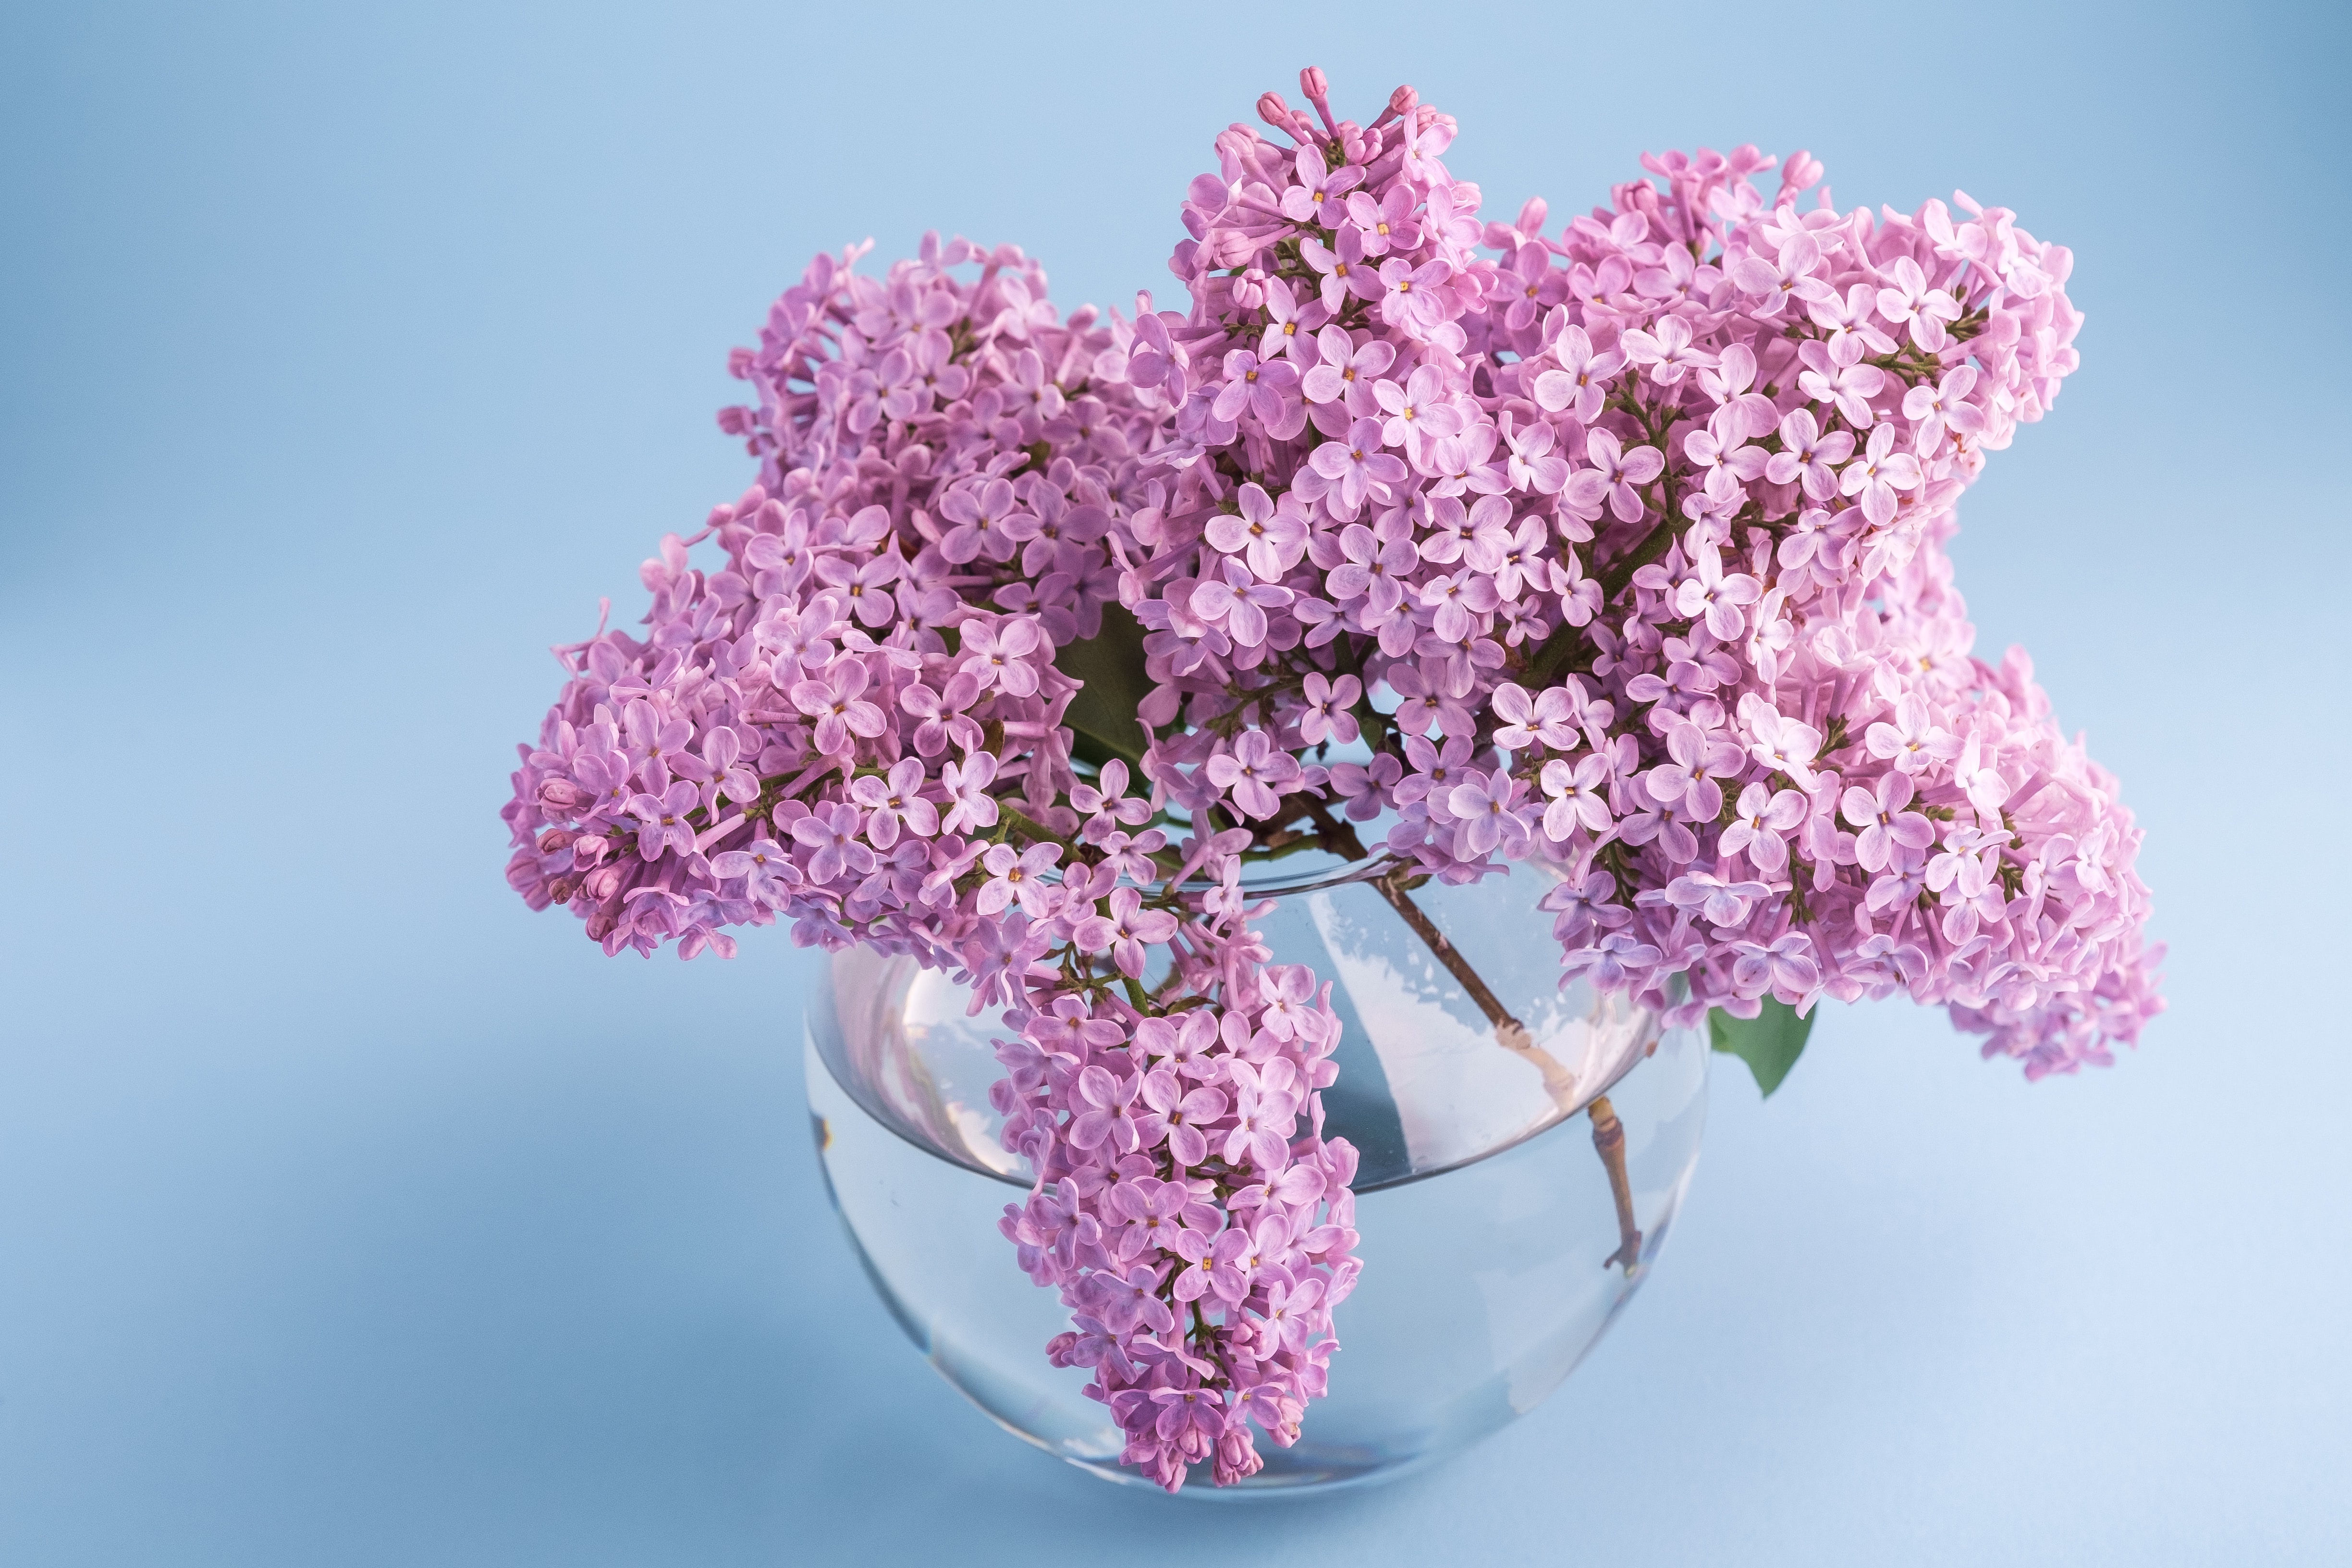 Lilac_Bouquets_Branches_Vase_597174_4896x3264.jpg